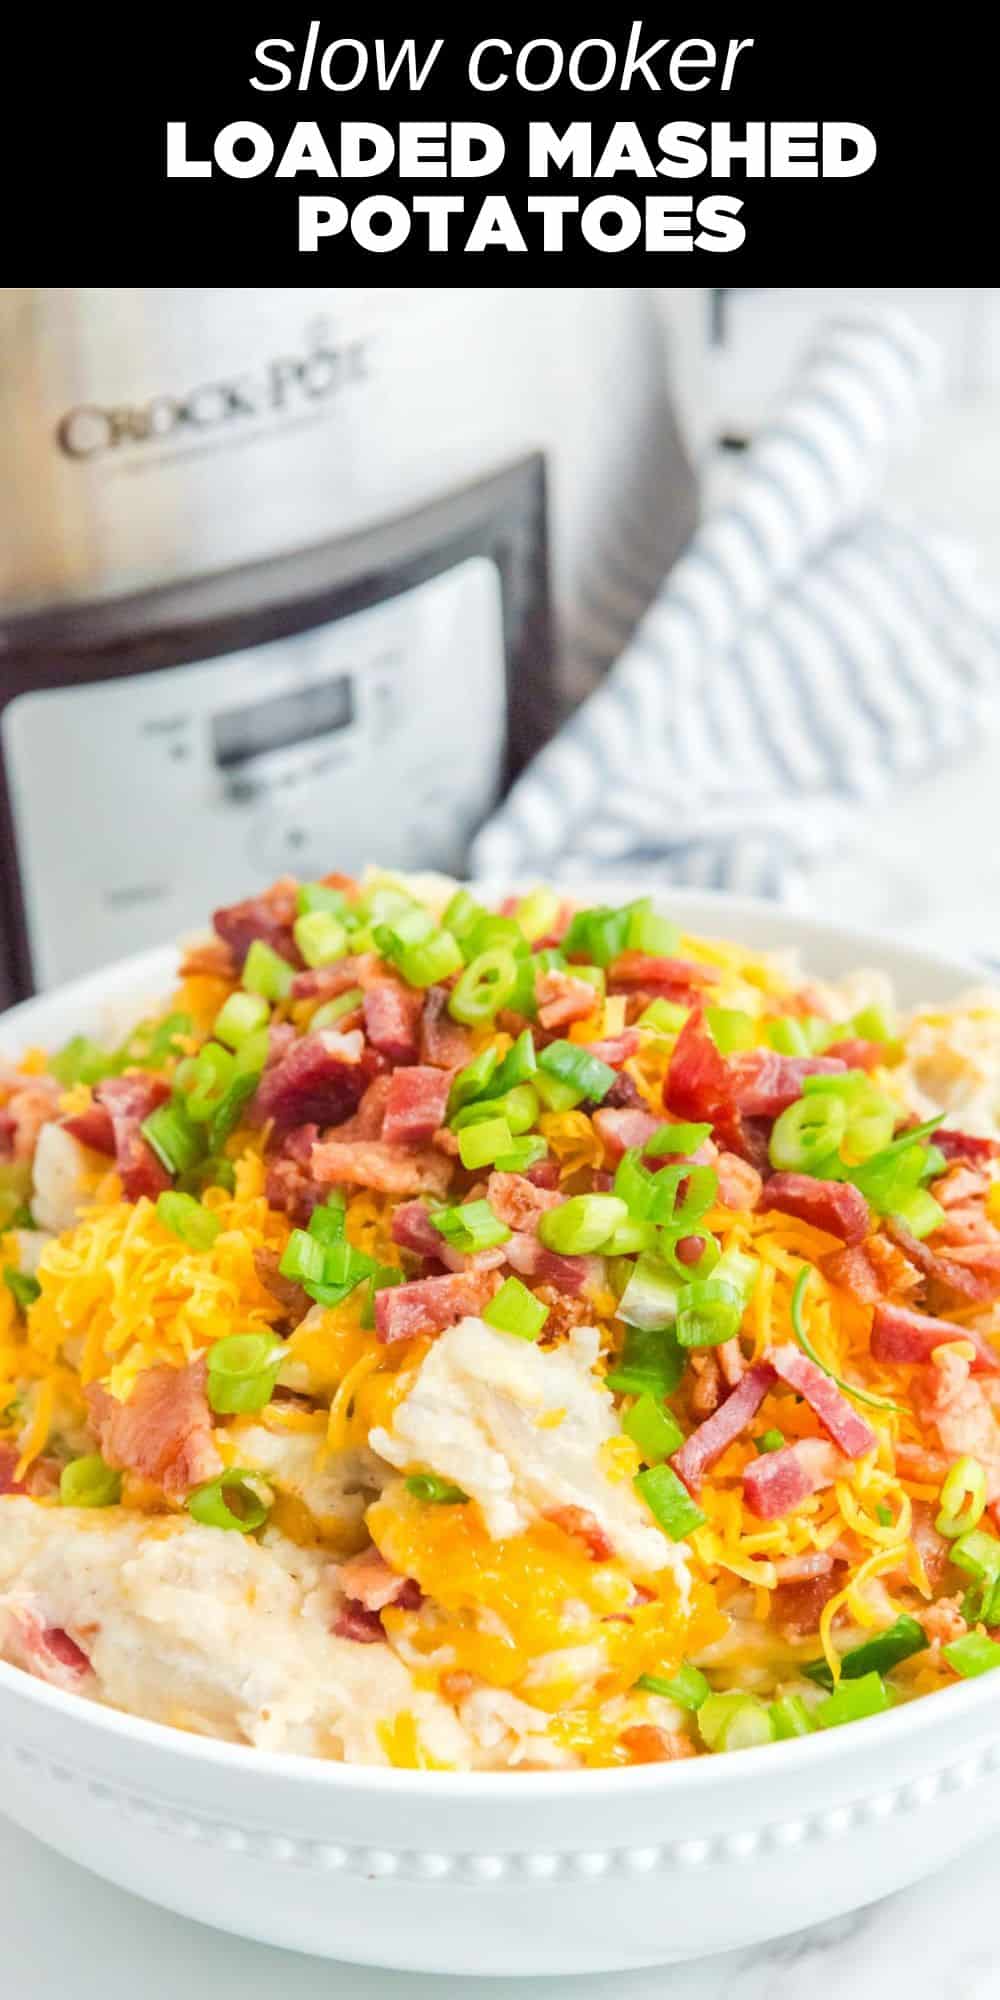 These decadent Slow Cooker Loaded Mashed Potatoes are the ultimate comfort food. Rich and creamy with a combination of cheesy and smoky flavors, these potatoes make an irresistible side dish for any occasion.